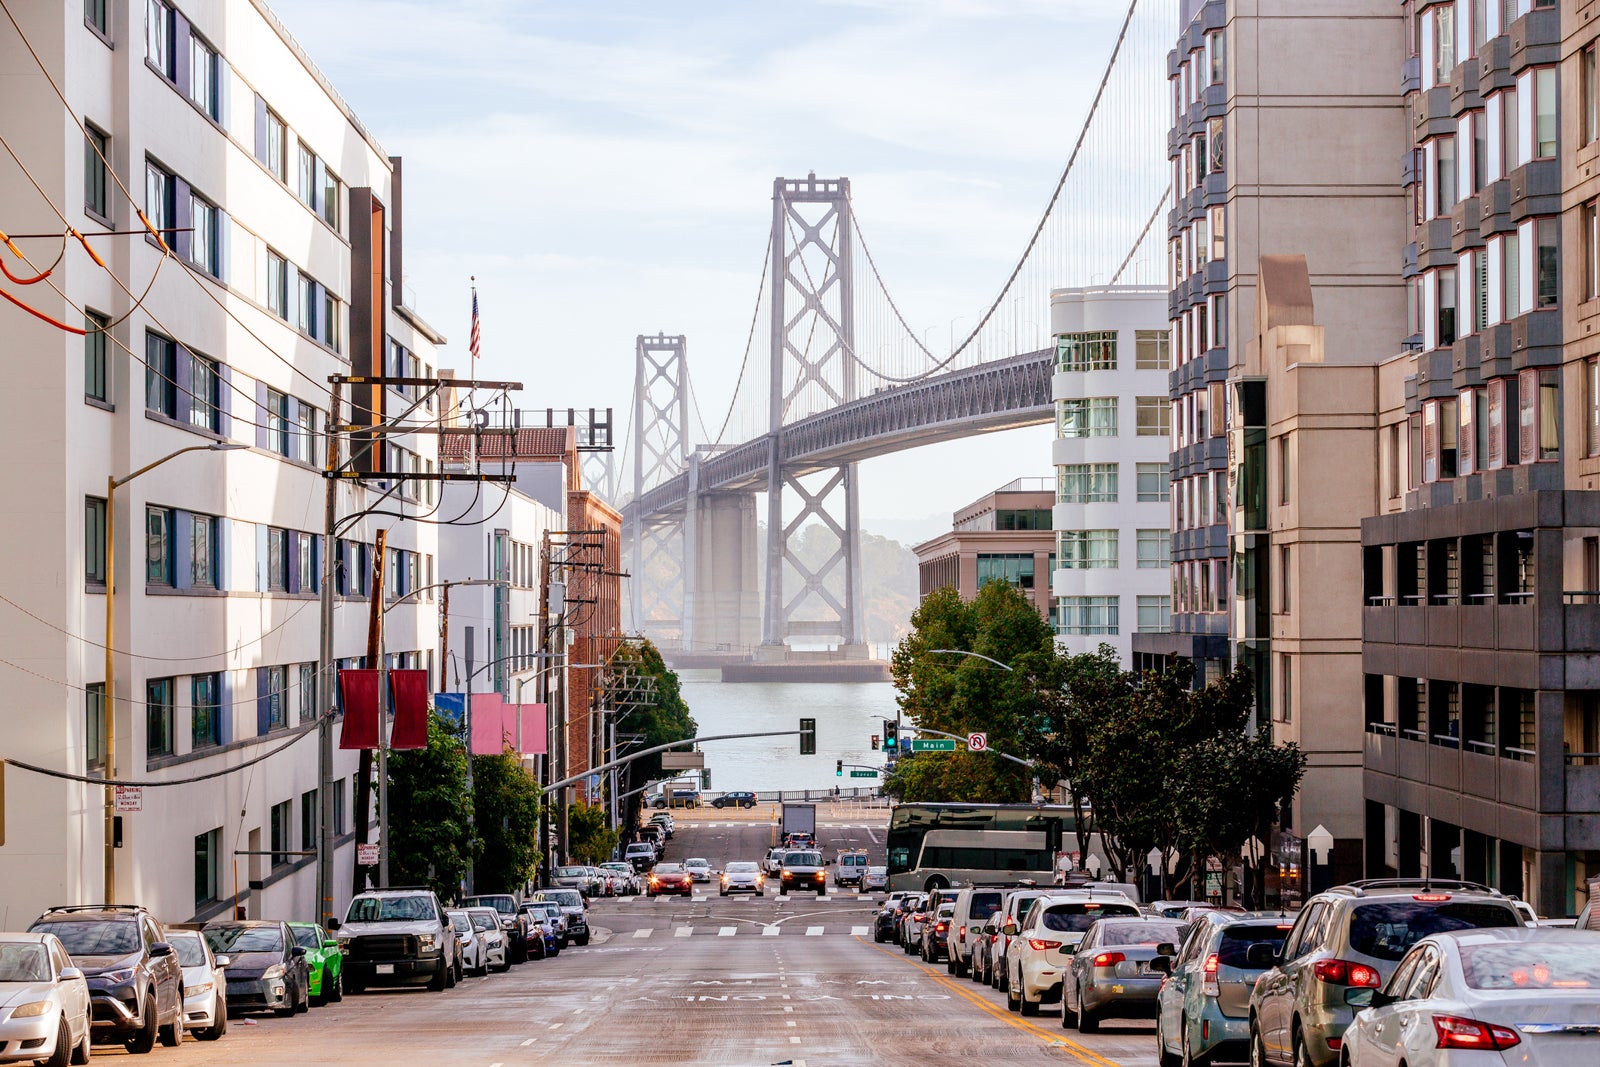 A beautiful view of the Bay Bridge from the street.